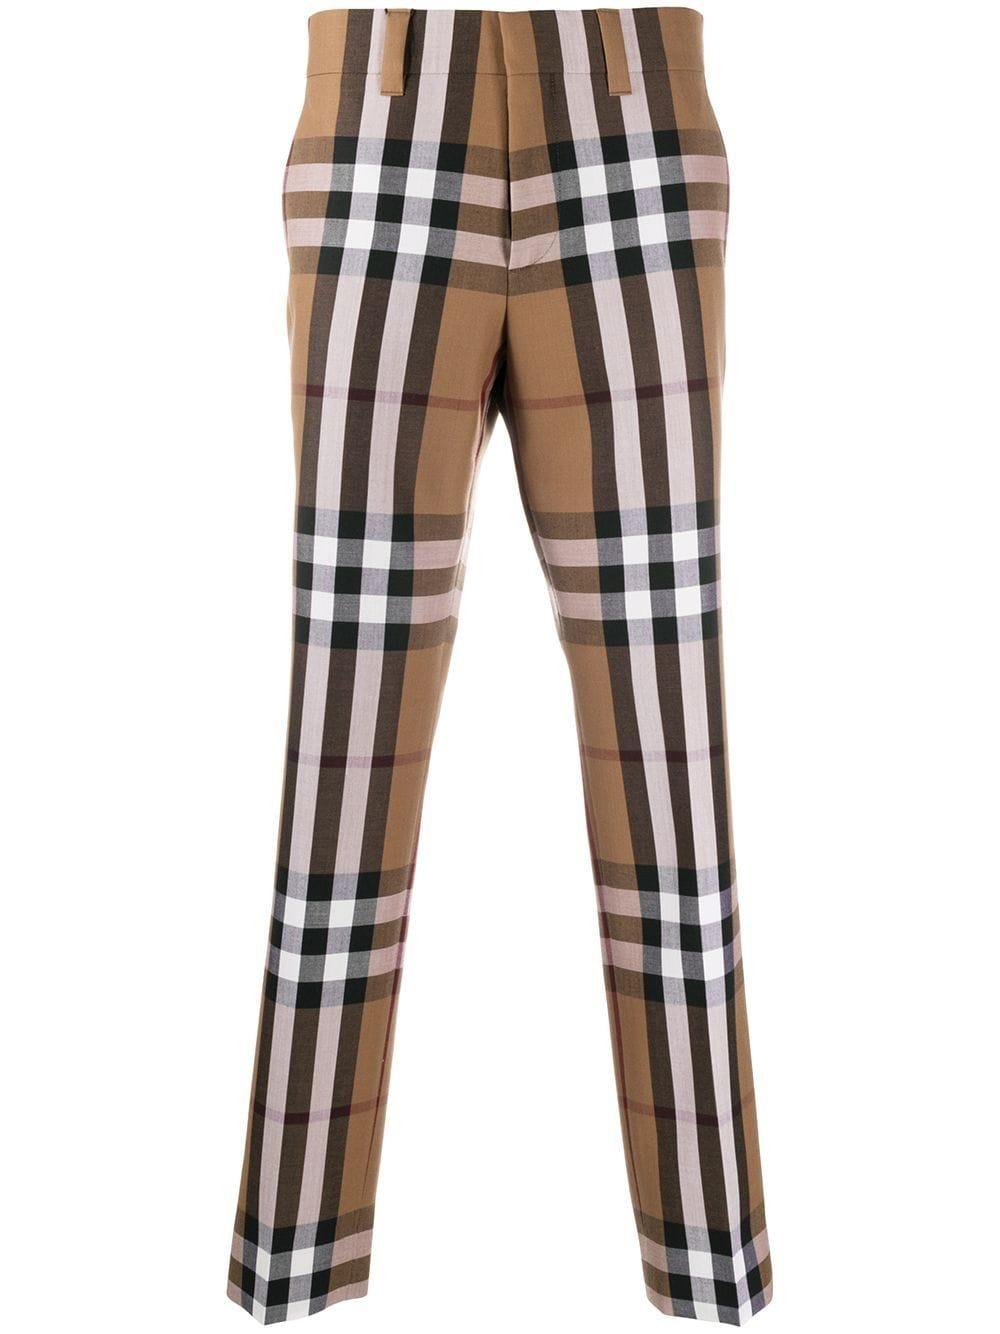 Burberry House Check Wool Trousers 50 Wool in Brown,Black,White 